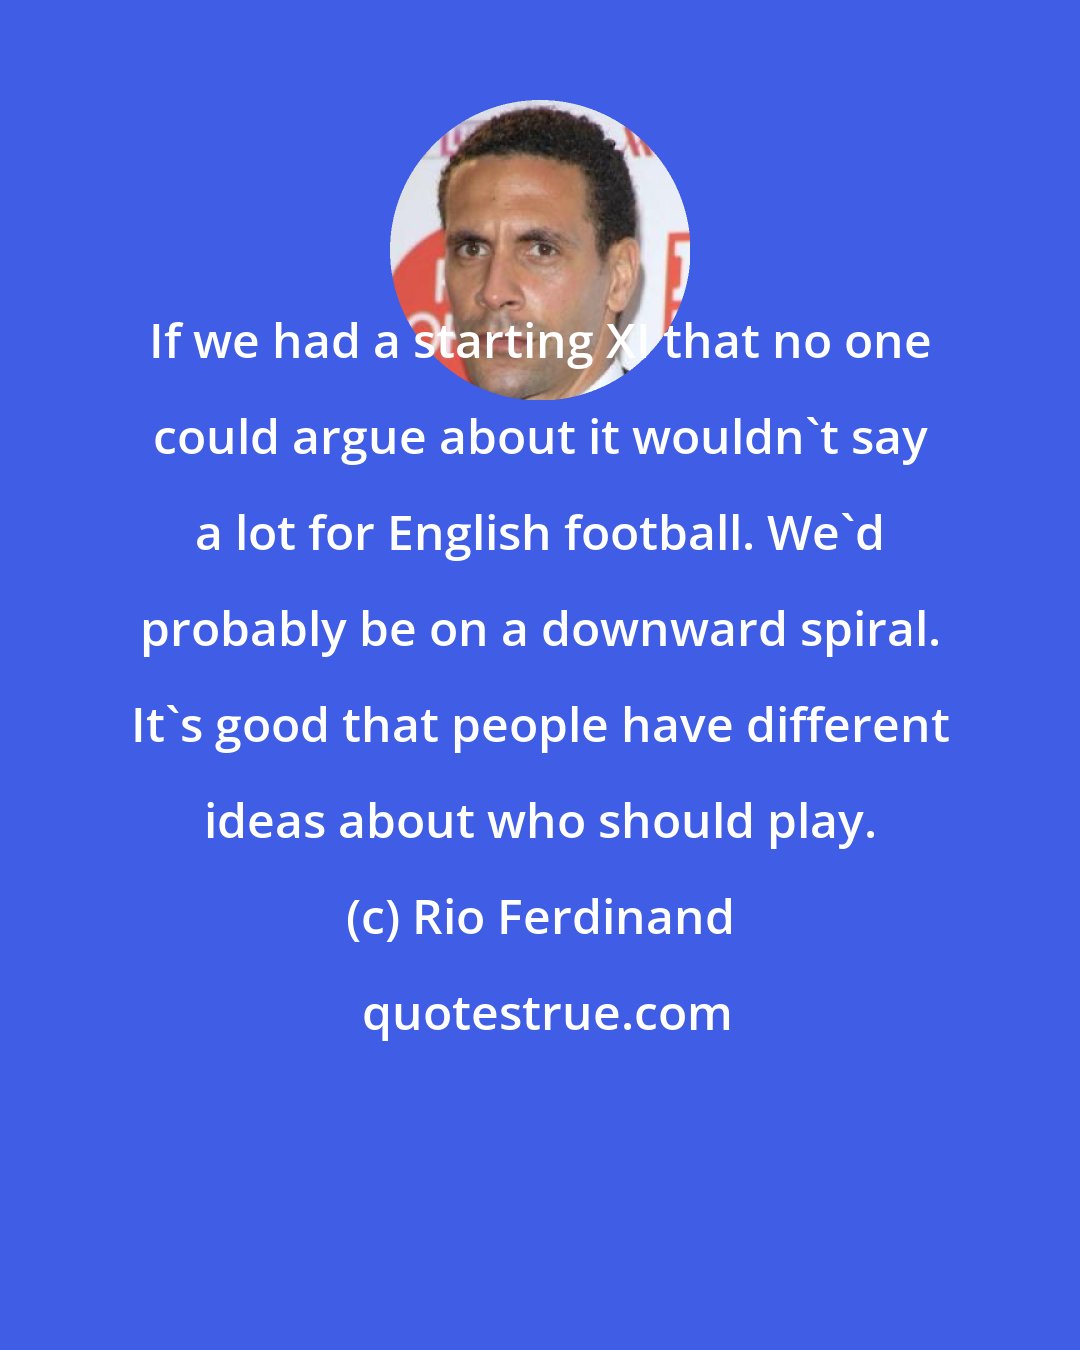 Rio Ferdinand: If we had a starting XI that no one could argue about it wouldn't say a lot for English football. We'd probably be on a downward spiral. It's good that people have different ideas about who should play.